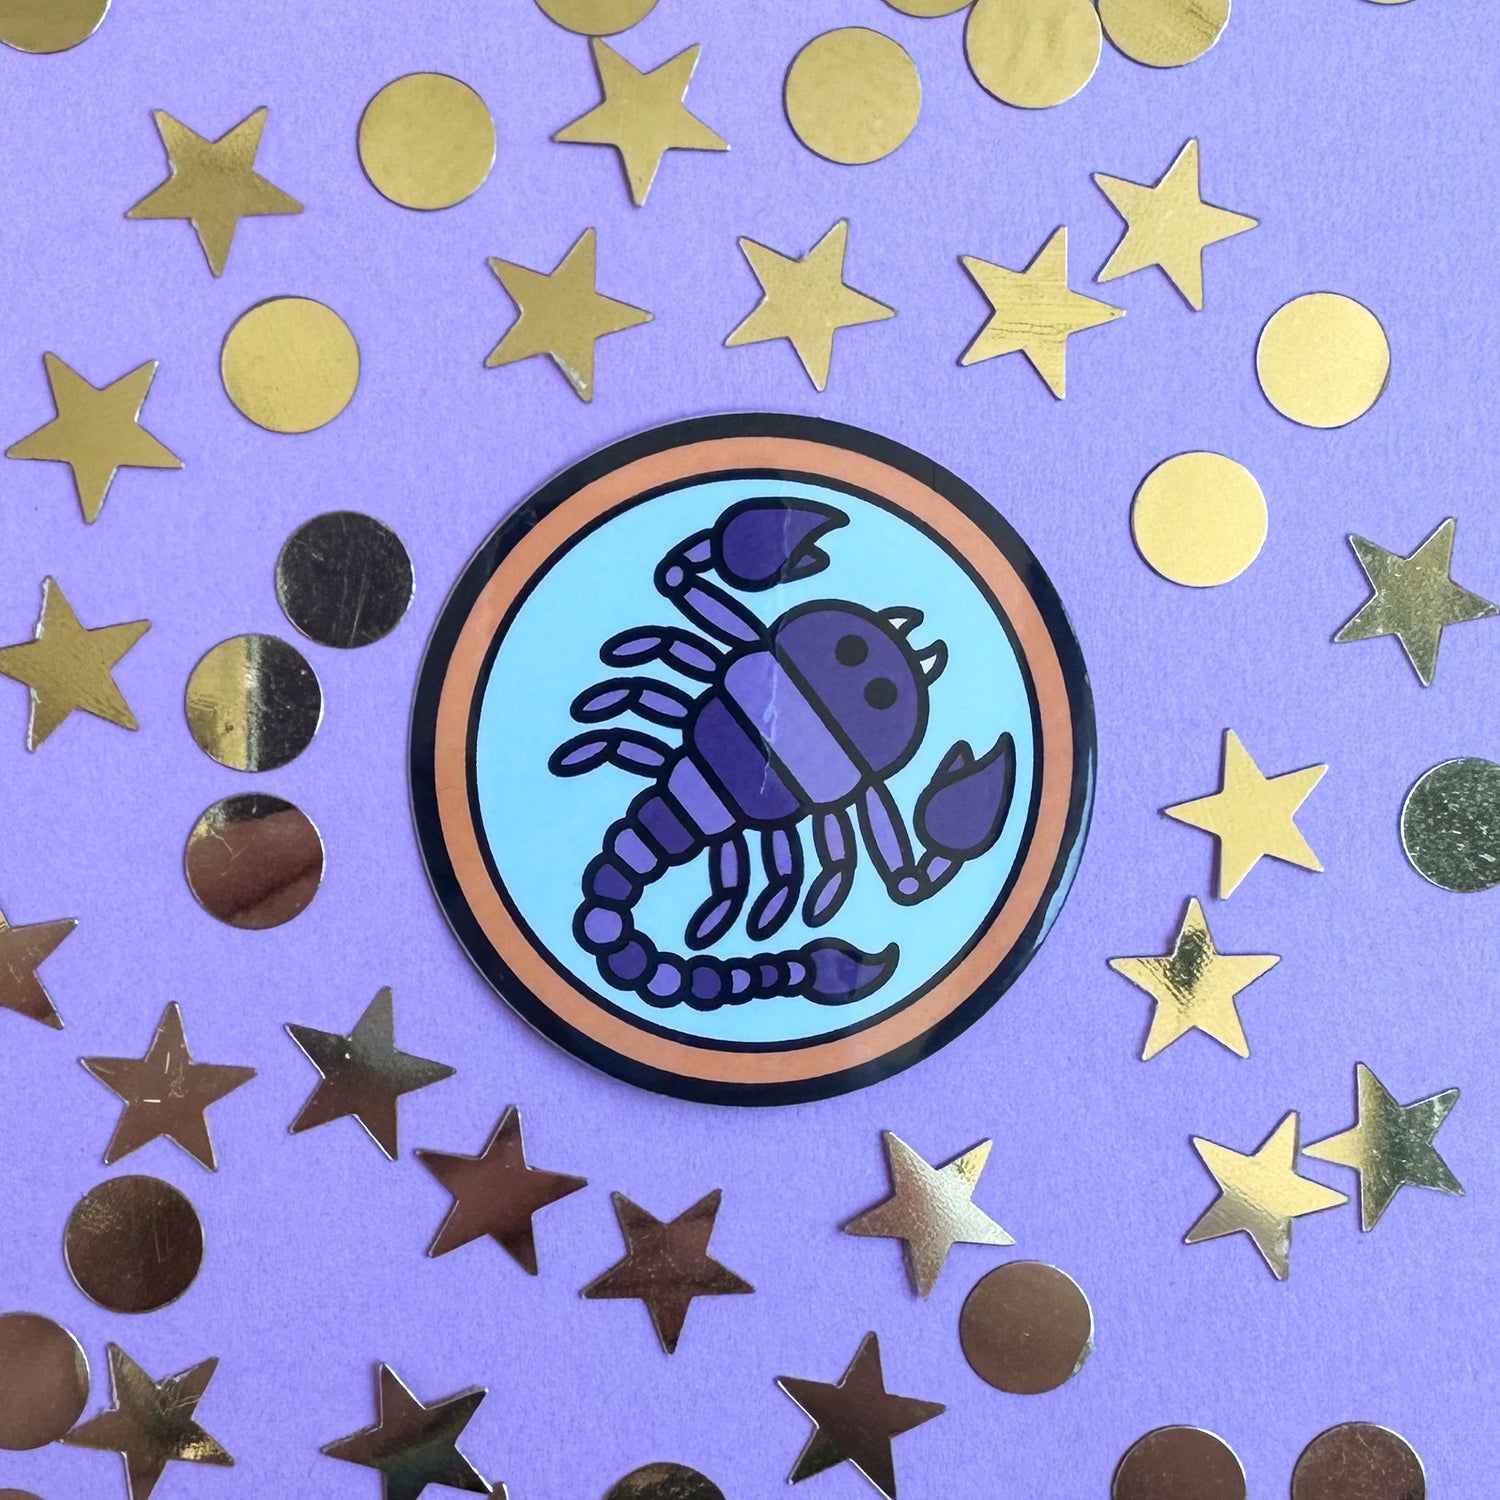 A circle sticker with a purple scorpion in it to symbolize the Scorpio zodiac sign. The sticker is on a purple paper background covered in gold star and circle confetti. 